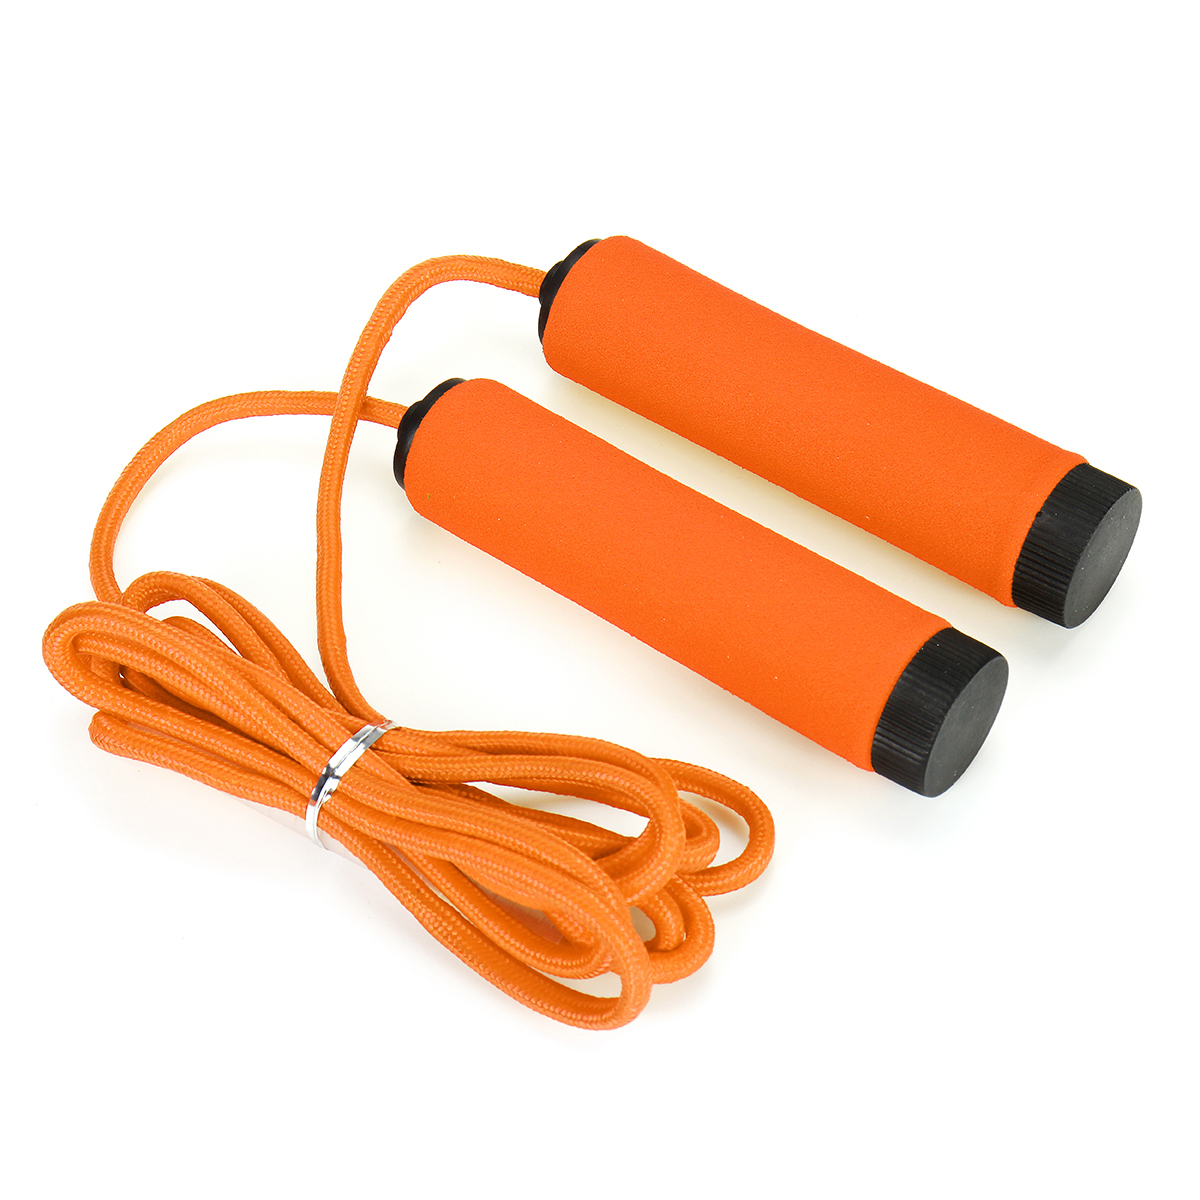 3PcsSet-Skipping-Rope-Fitness-Heavy-Hand-Gripper-Dumbbells-Muscle-Strength-Training-Tools-1692559-7